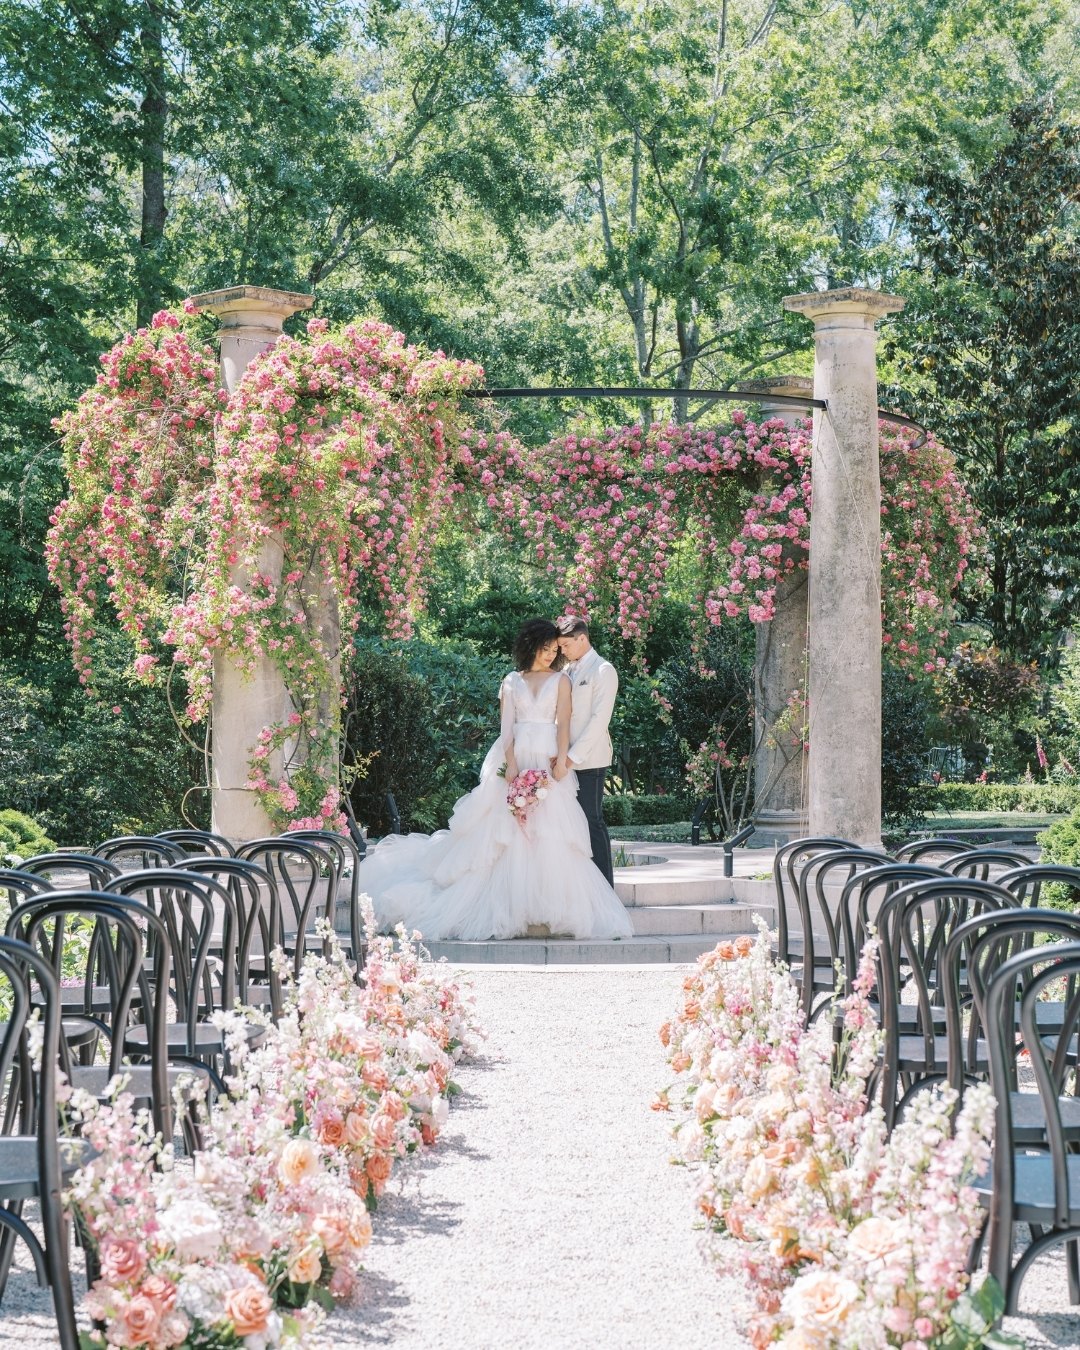 Bride and groom embracing at altar among light pink roses